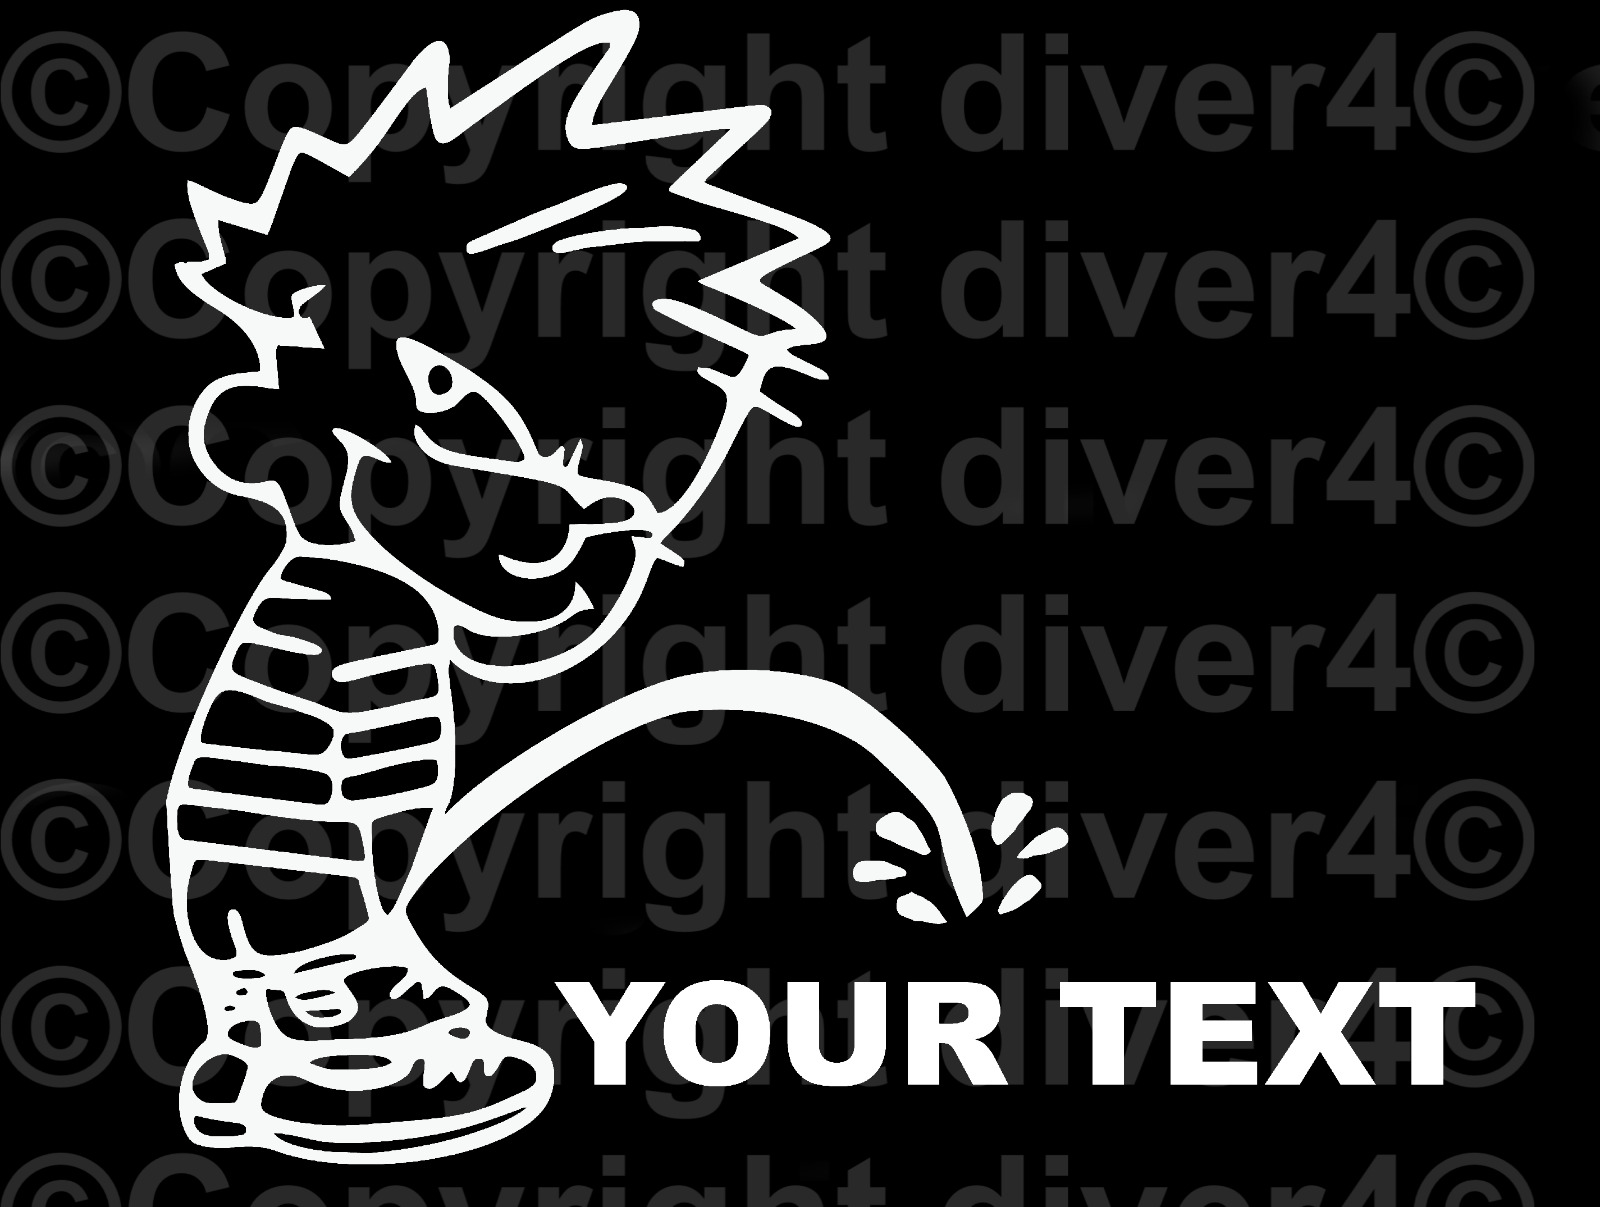 Calvin Peeing on Your Custom Text Sticker Car Window Decal US Seller